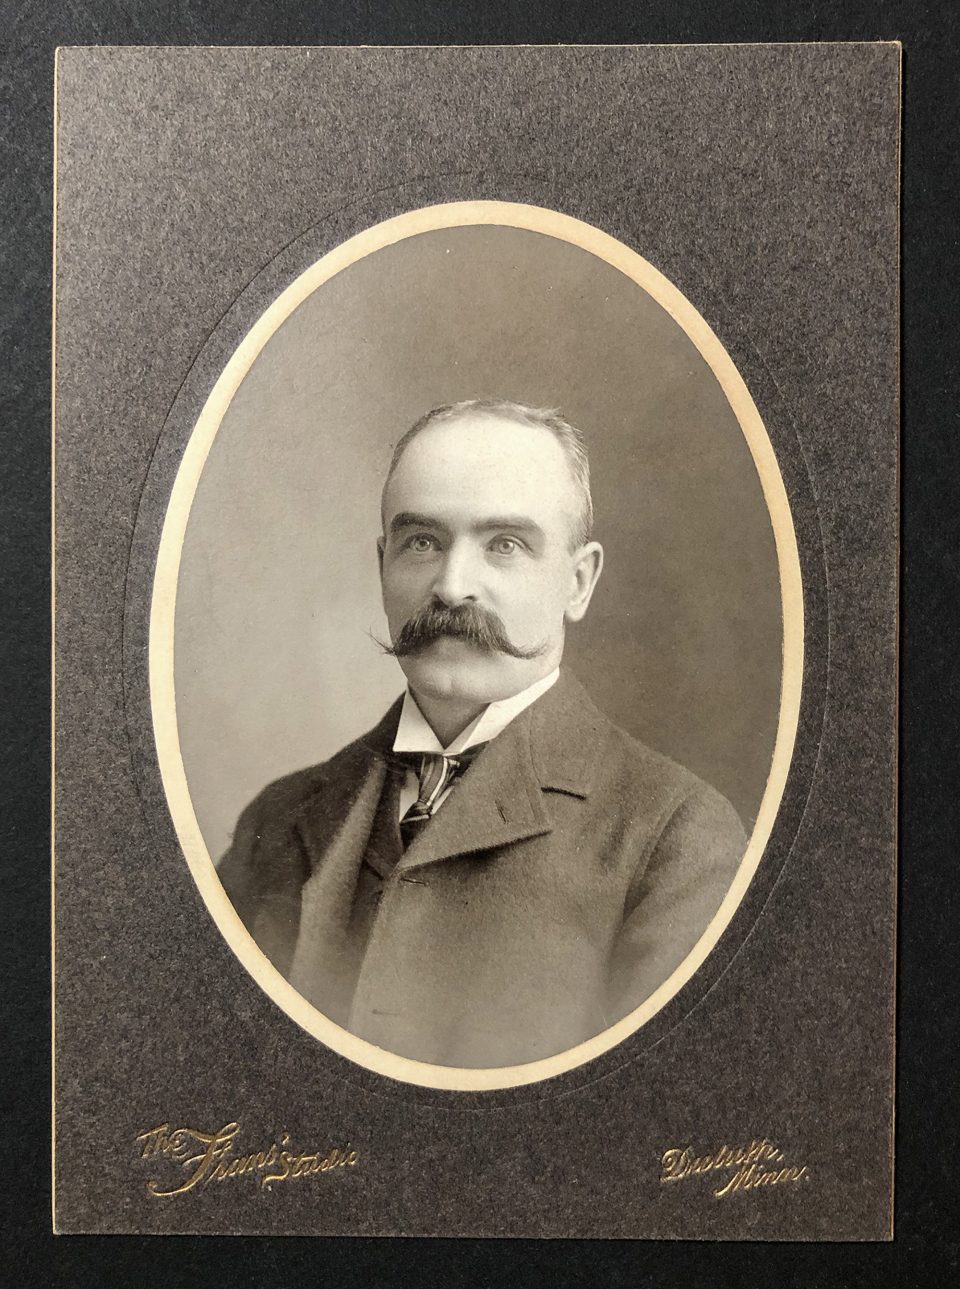 Black and white head and shoulders portrait of a man with a handlebar mustache wearing and wearing an overcoat, shot by The Fran's Studio in Duluth. The portrait is held in an oval photo mat, and the verso is blank.